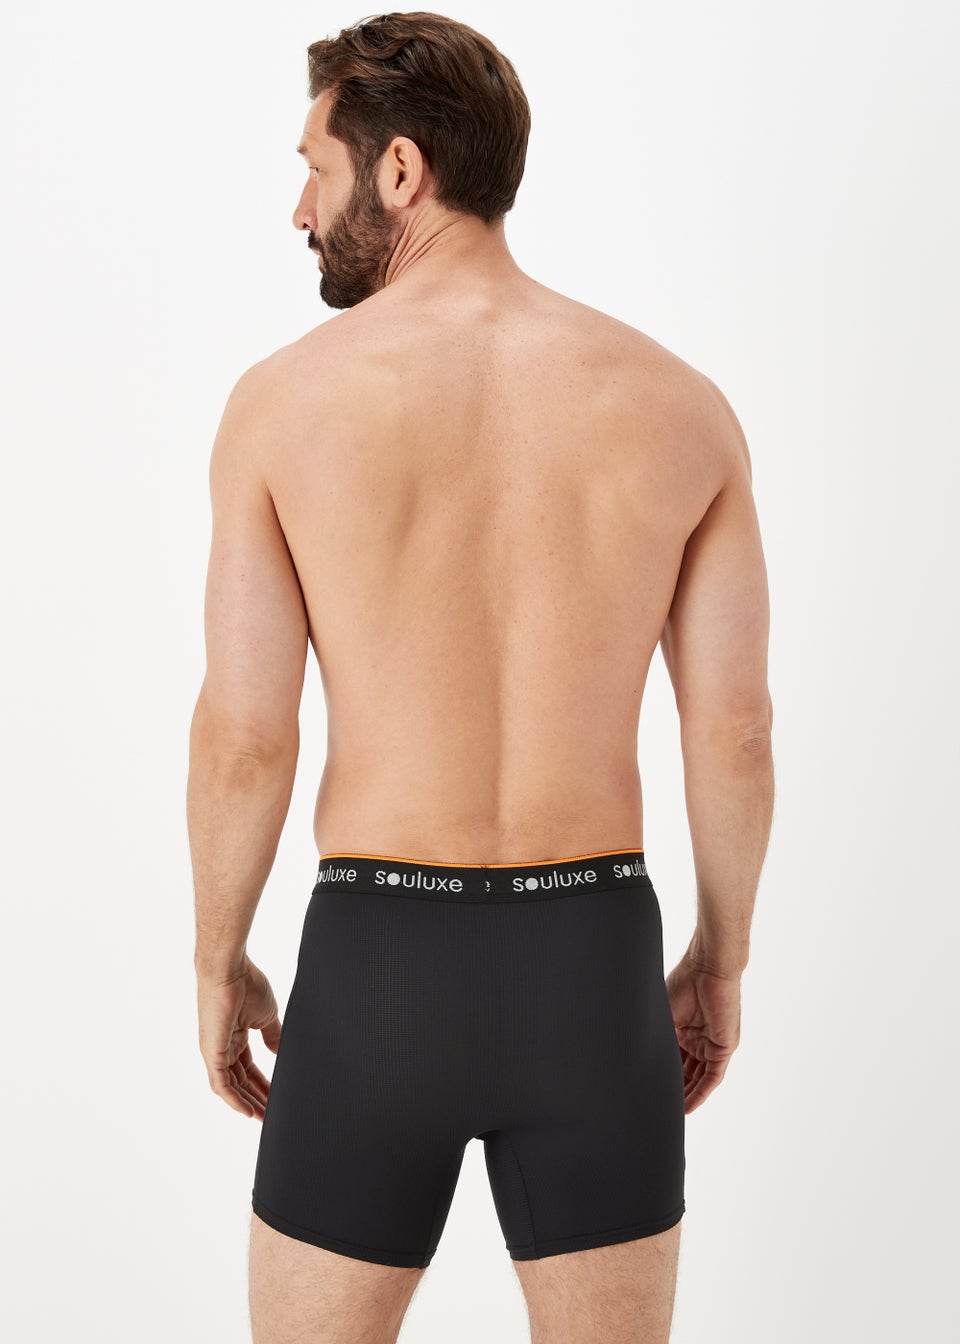 Souluxe 3 Pack Black Sports Boxers